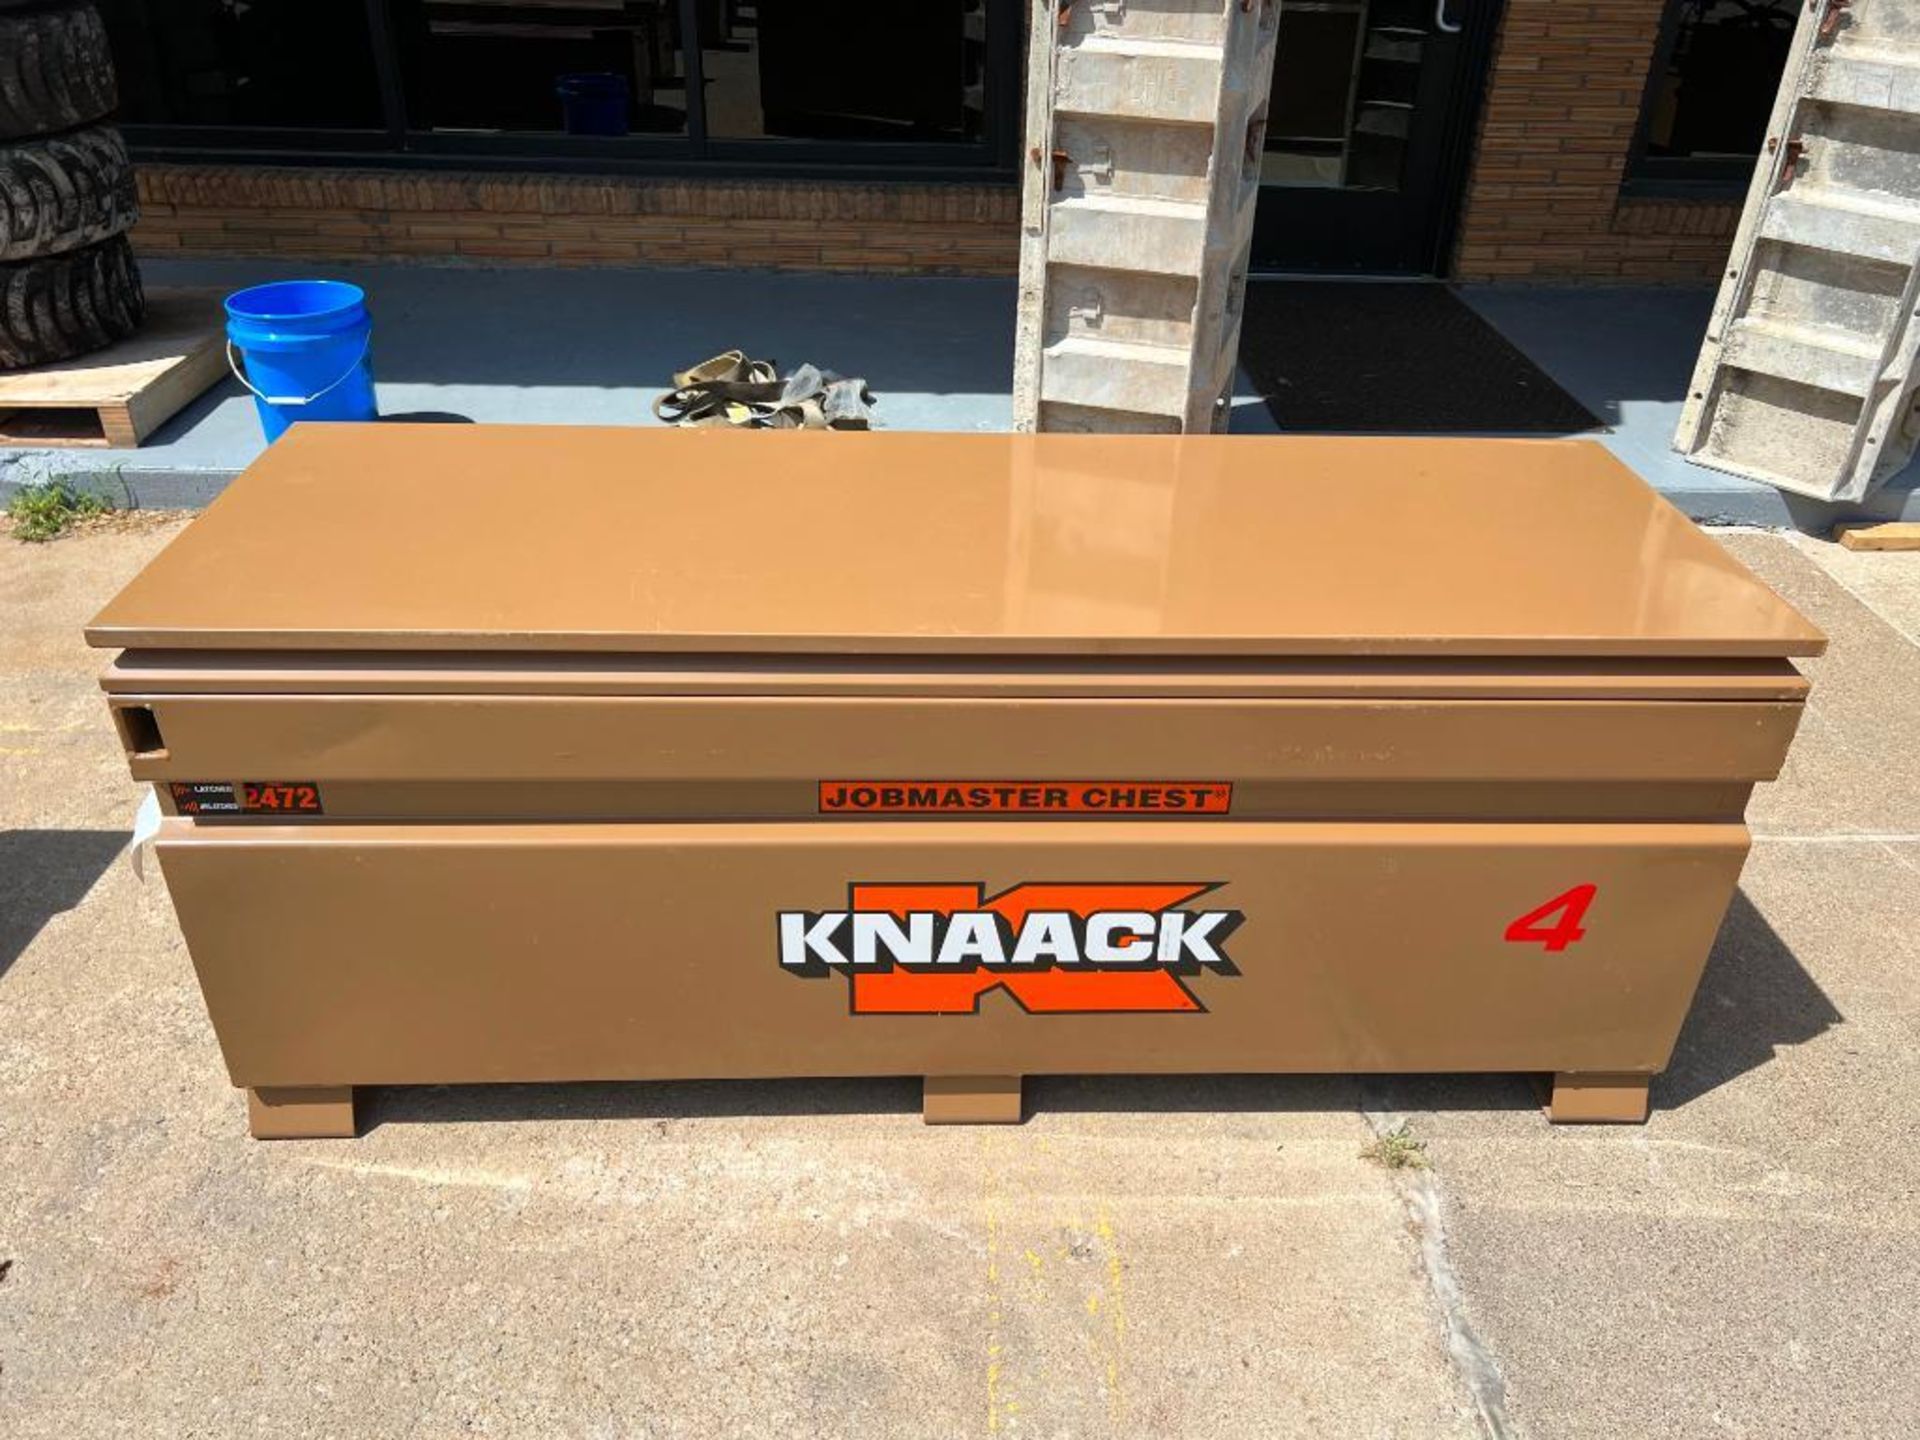 Knaack Jobmaster Chest, Model #2472, Serial #2211017597. Located in Mt. Pleasant, IA